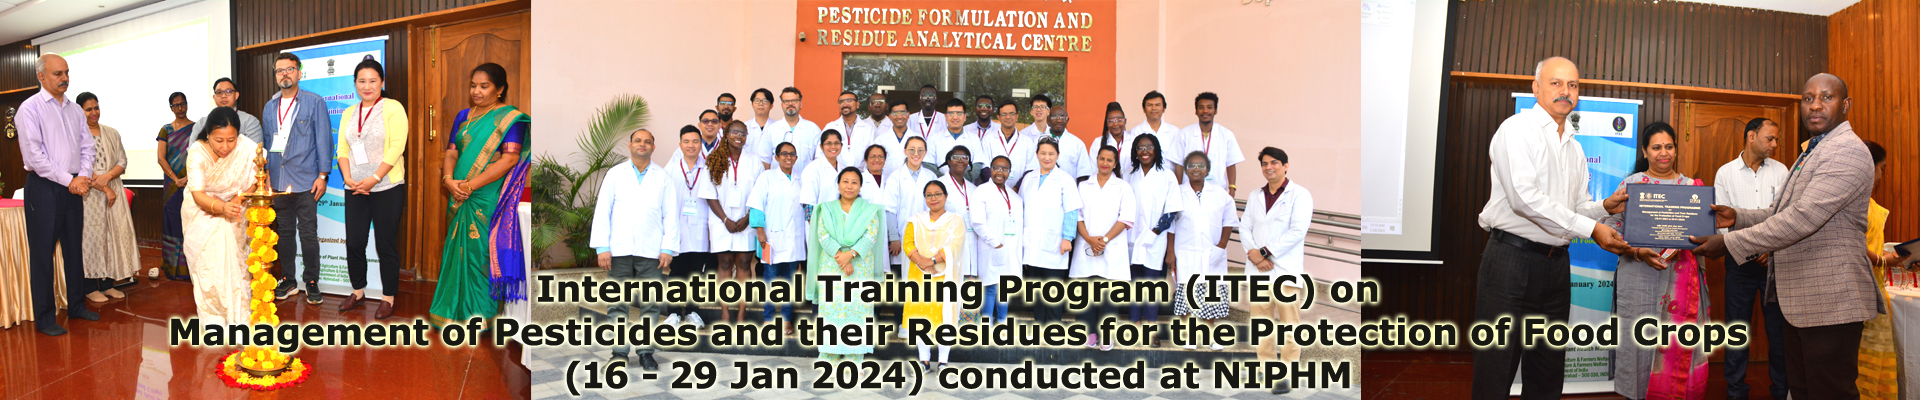 International Training Program (ITEC) on Management of Pesticides and their Residues for the Protection of Food Crops (16 - 19 Jan 2024) conducted @ NIPHM